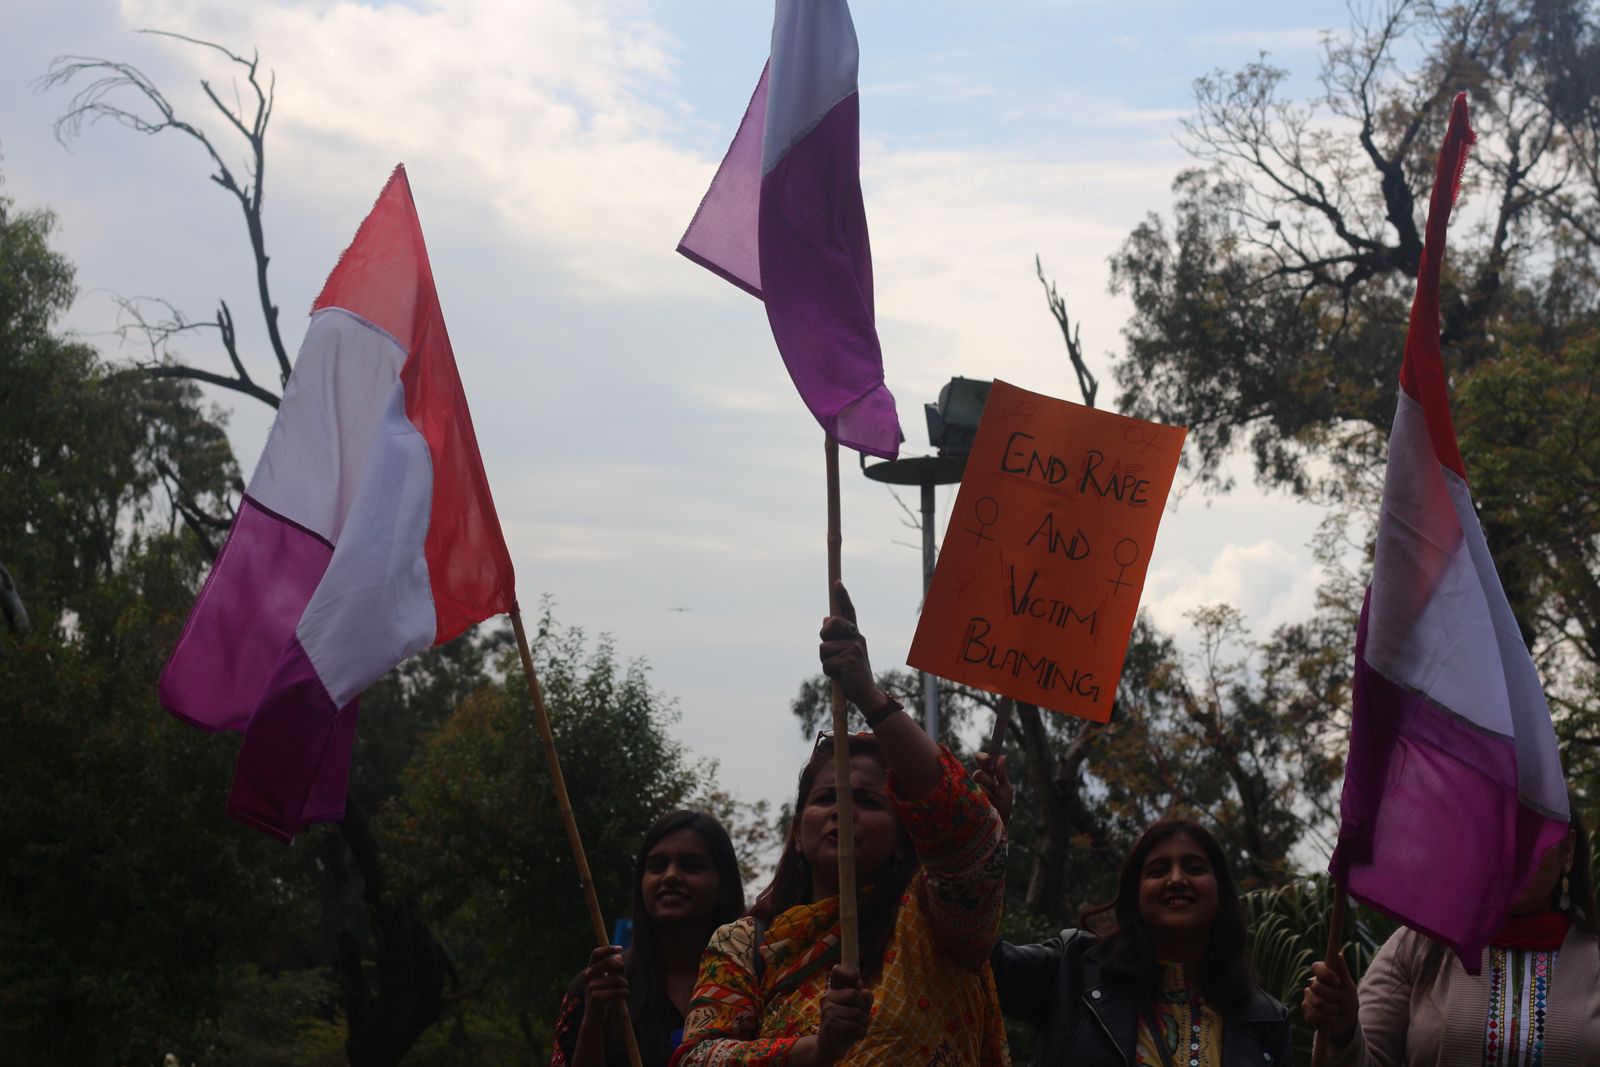 © Maheen Qadri - Comrades of the Women's Democratic Front in Islamabad (2020), waving their party's flag before the march begins.